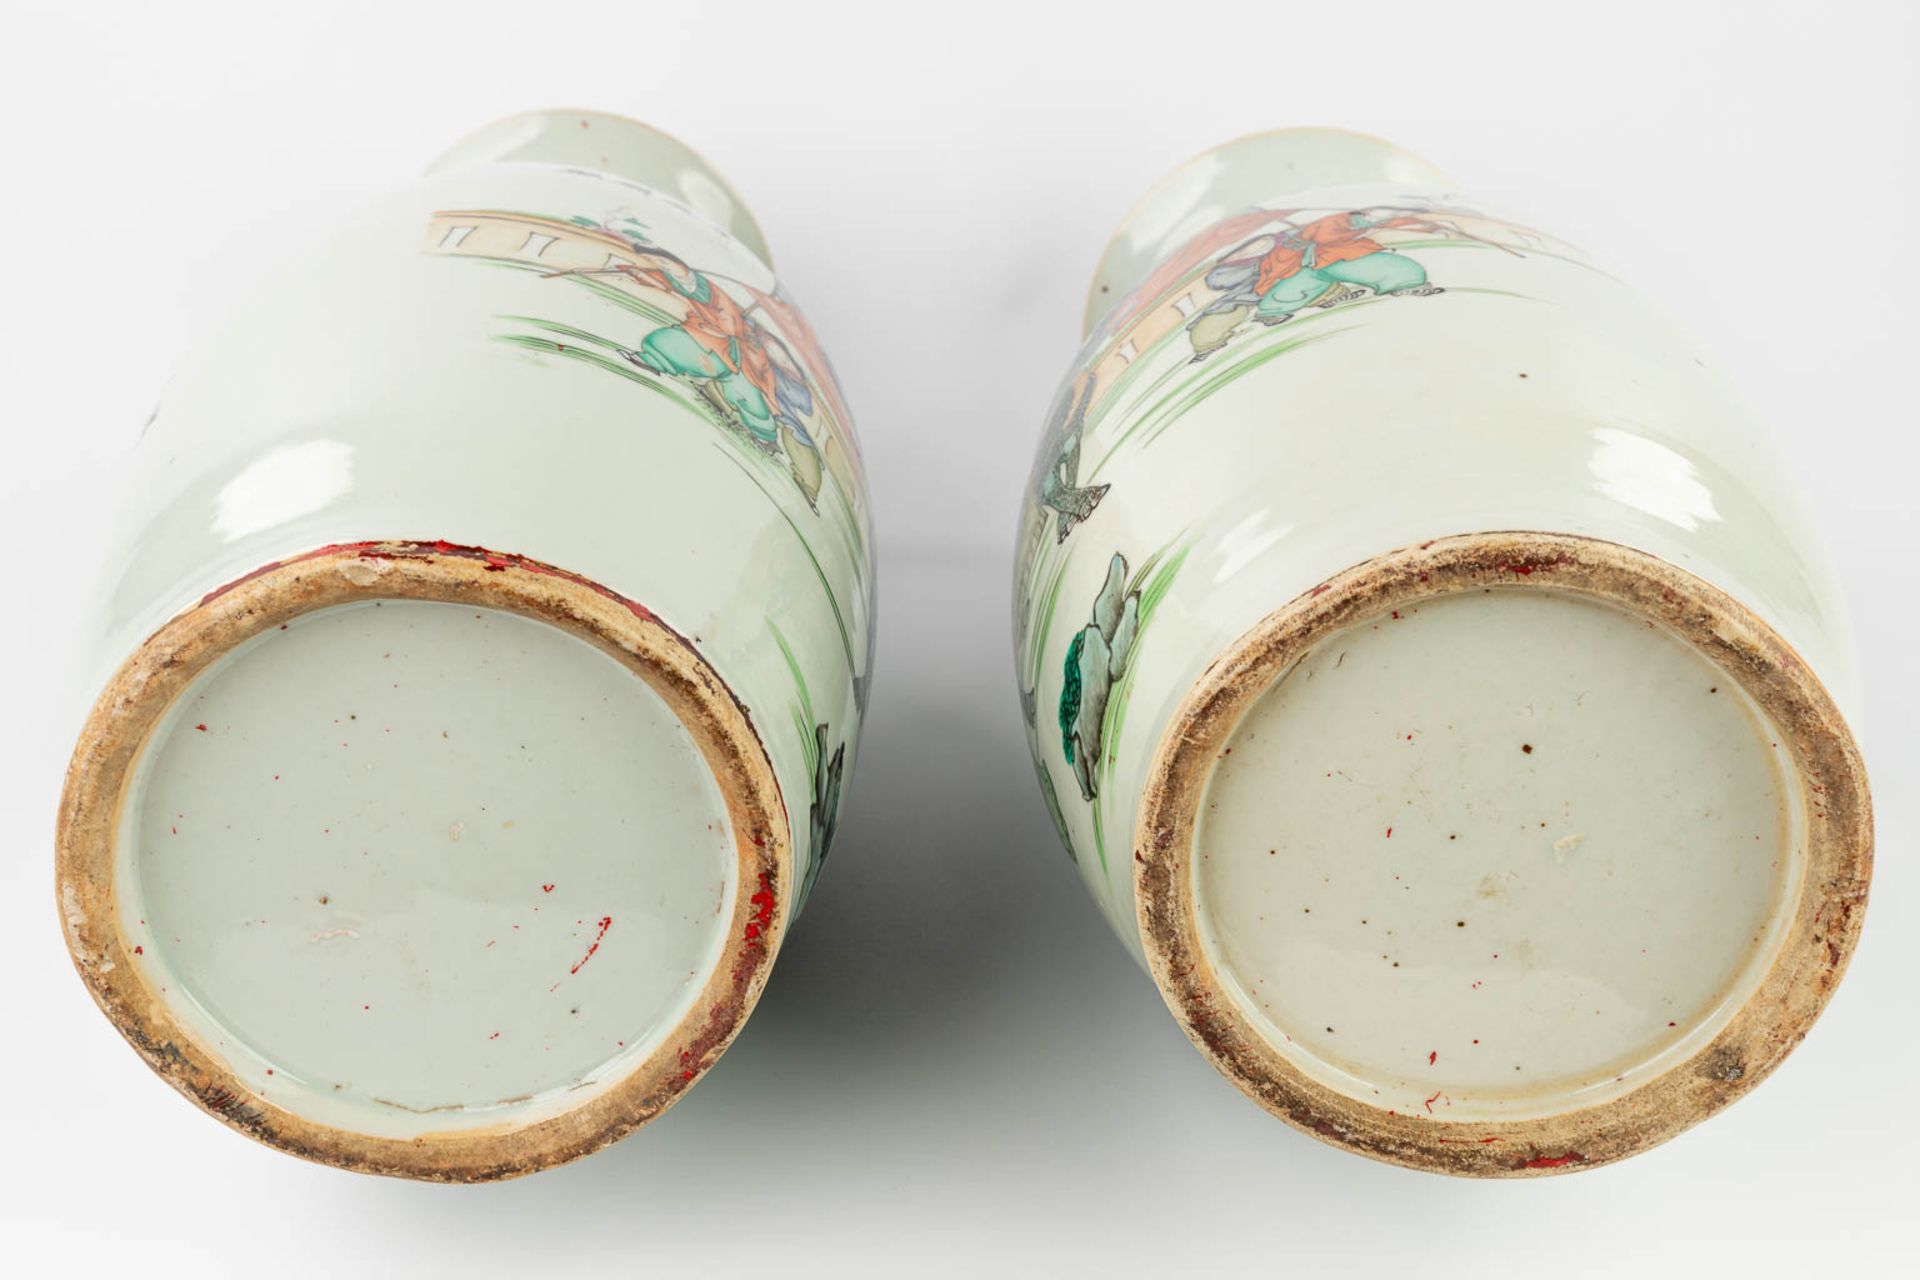 A pair of Chinese vases made of porcelain and decorated with mythological figurines. (58 x 22 cm) - Image 7 of 13